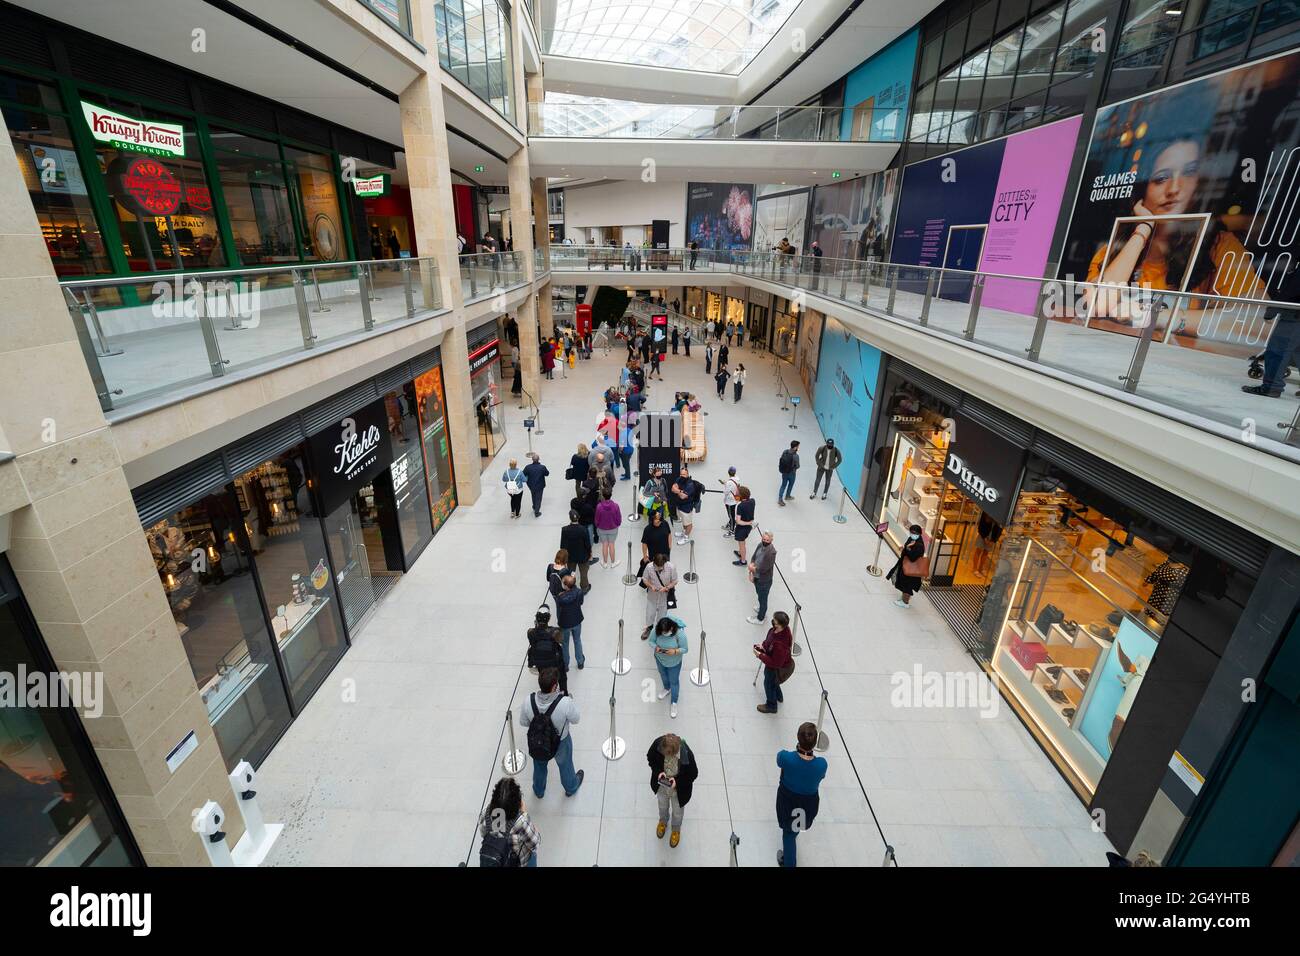 Edinburgh, Scotland, UK. 24 June 2021. First images of the new St James Quarter which opened this morning in Edinburgh. The large retail and residential complex replaced the St James Centre which occupied the site for many years. Pic; Queues outside Lego store in mall. Iain Masterton/Alamy Live News Stock Photo